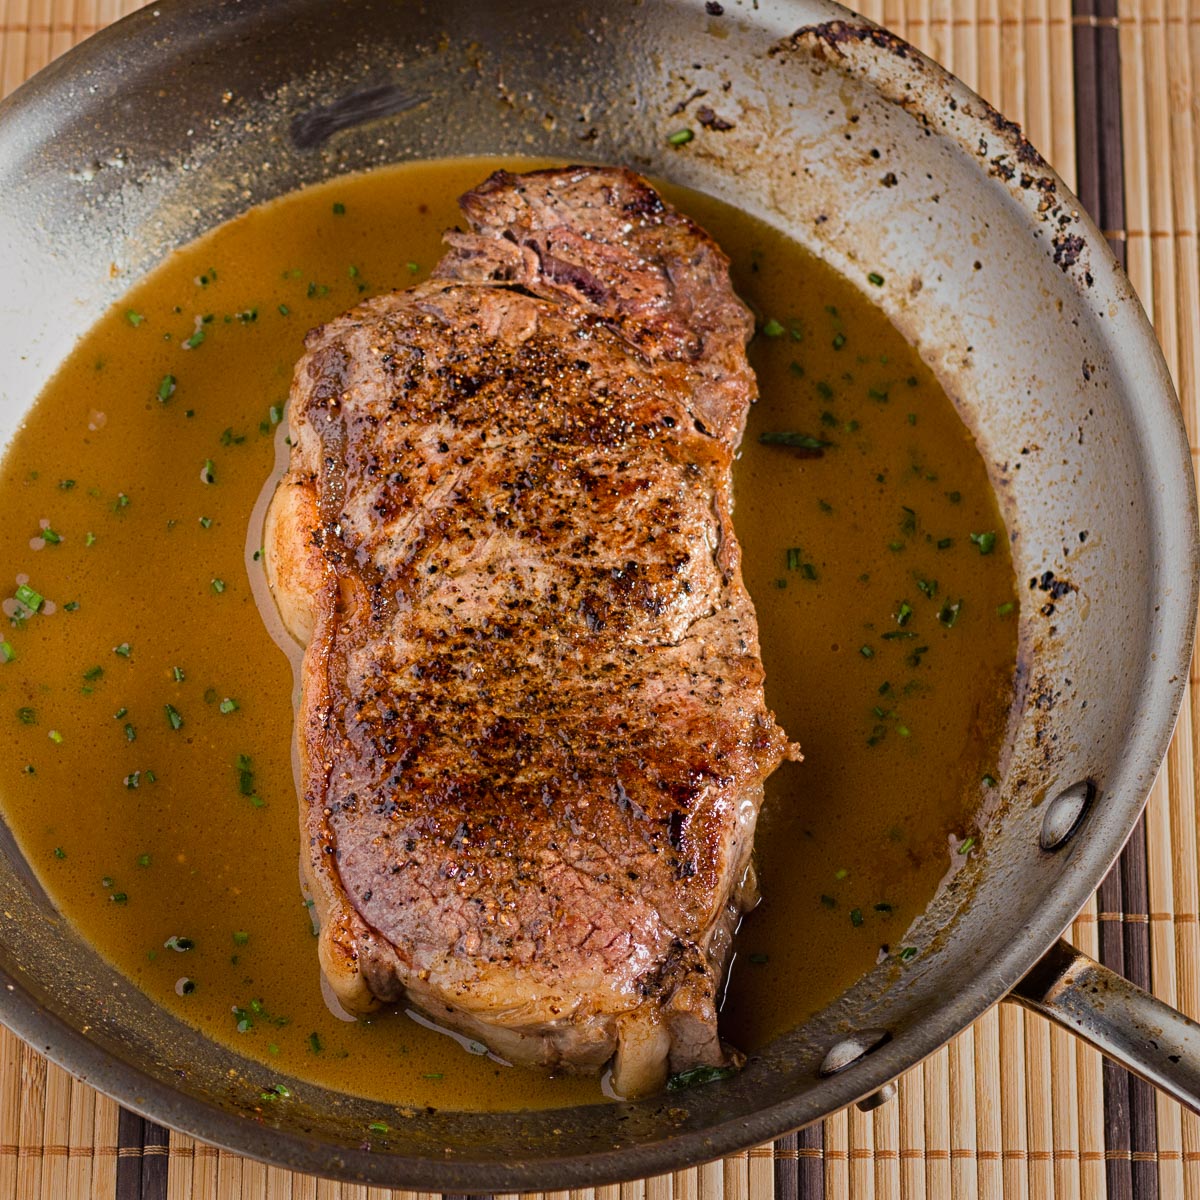 Pan fried steak with a dijon white wine mustard sauce is quick to make but big on flavour. A bit more work than grilled but absolutely delicious.